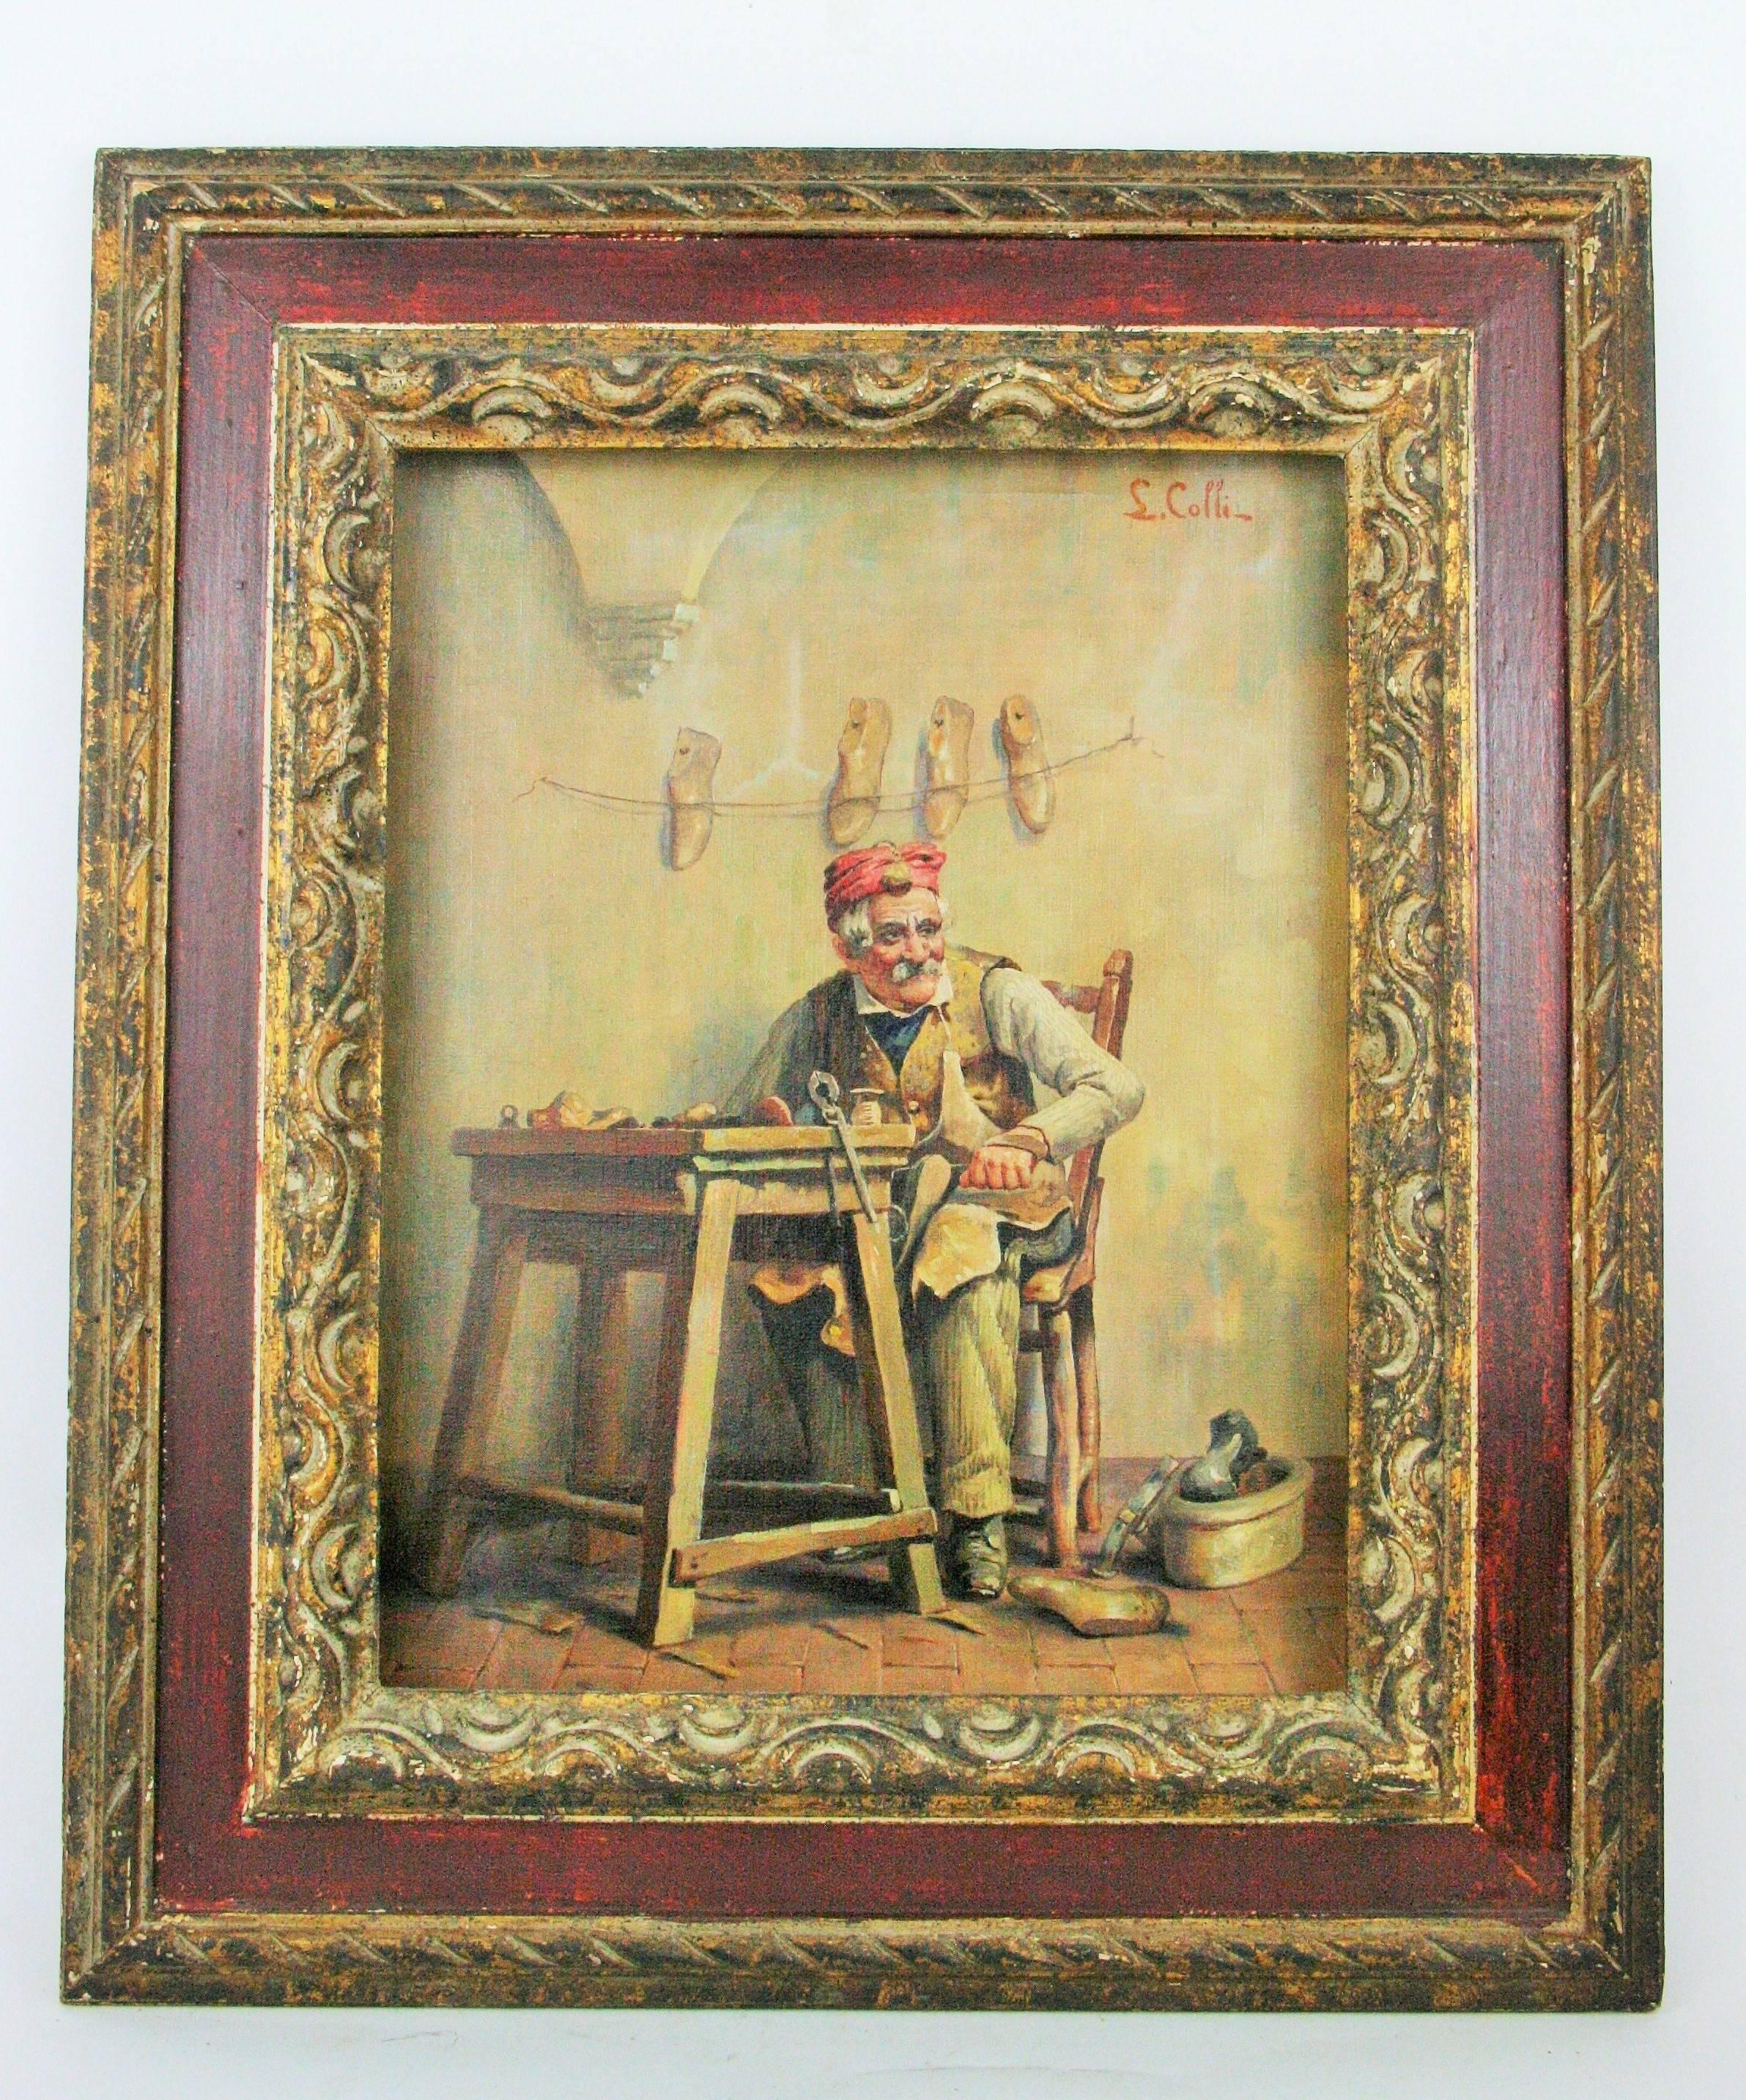 Unknown Figurative Painting -  Antique  Italian Cobbler Figurative Oil Painting  by L. Colli 1920